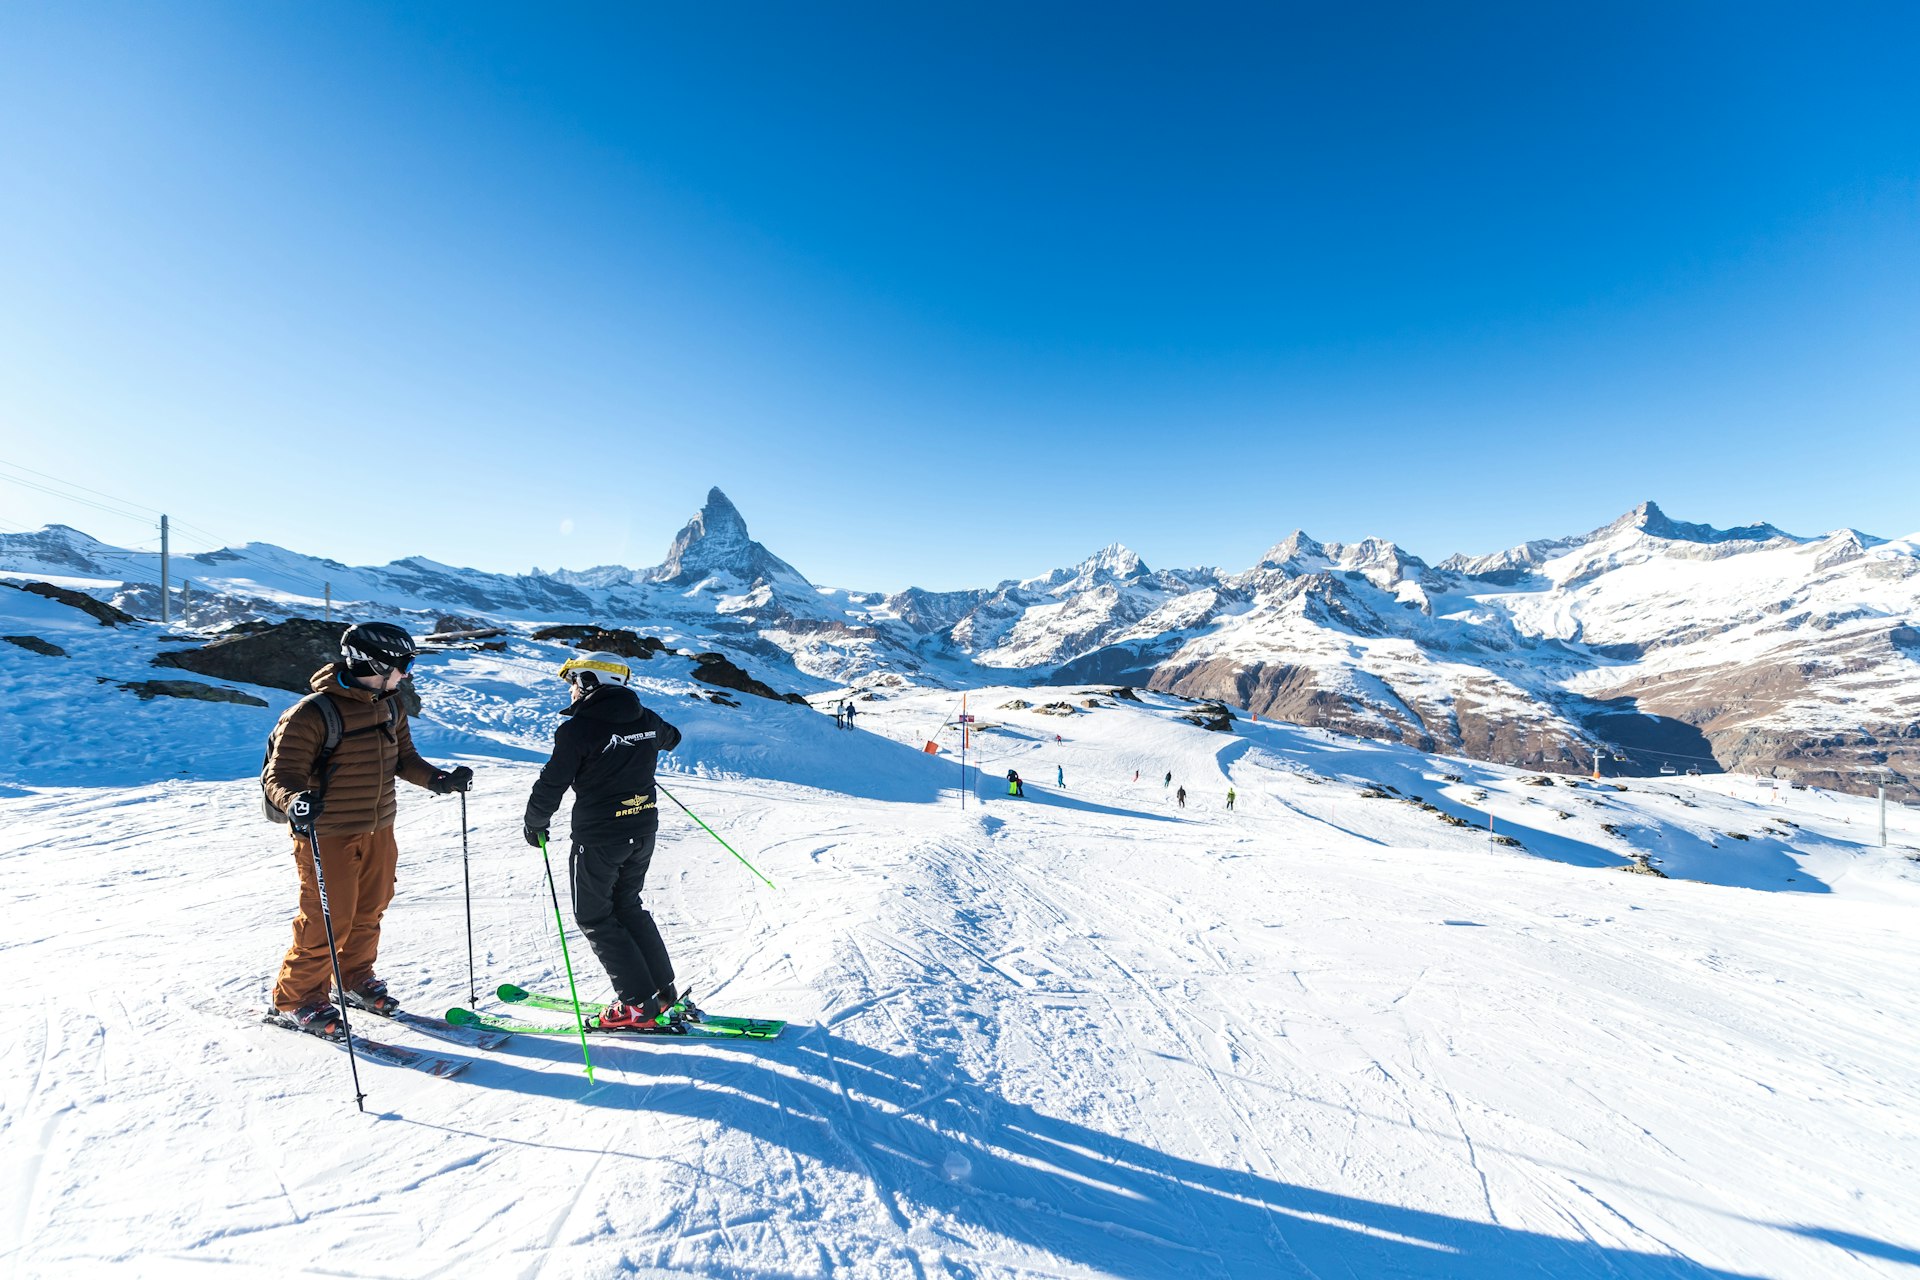 An instructor speaks to a skier as they stand at the top of a slope.